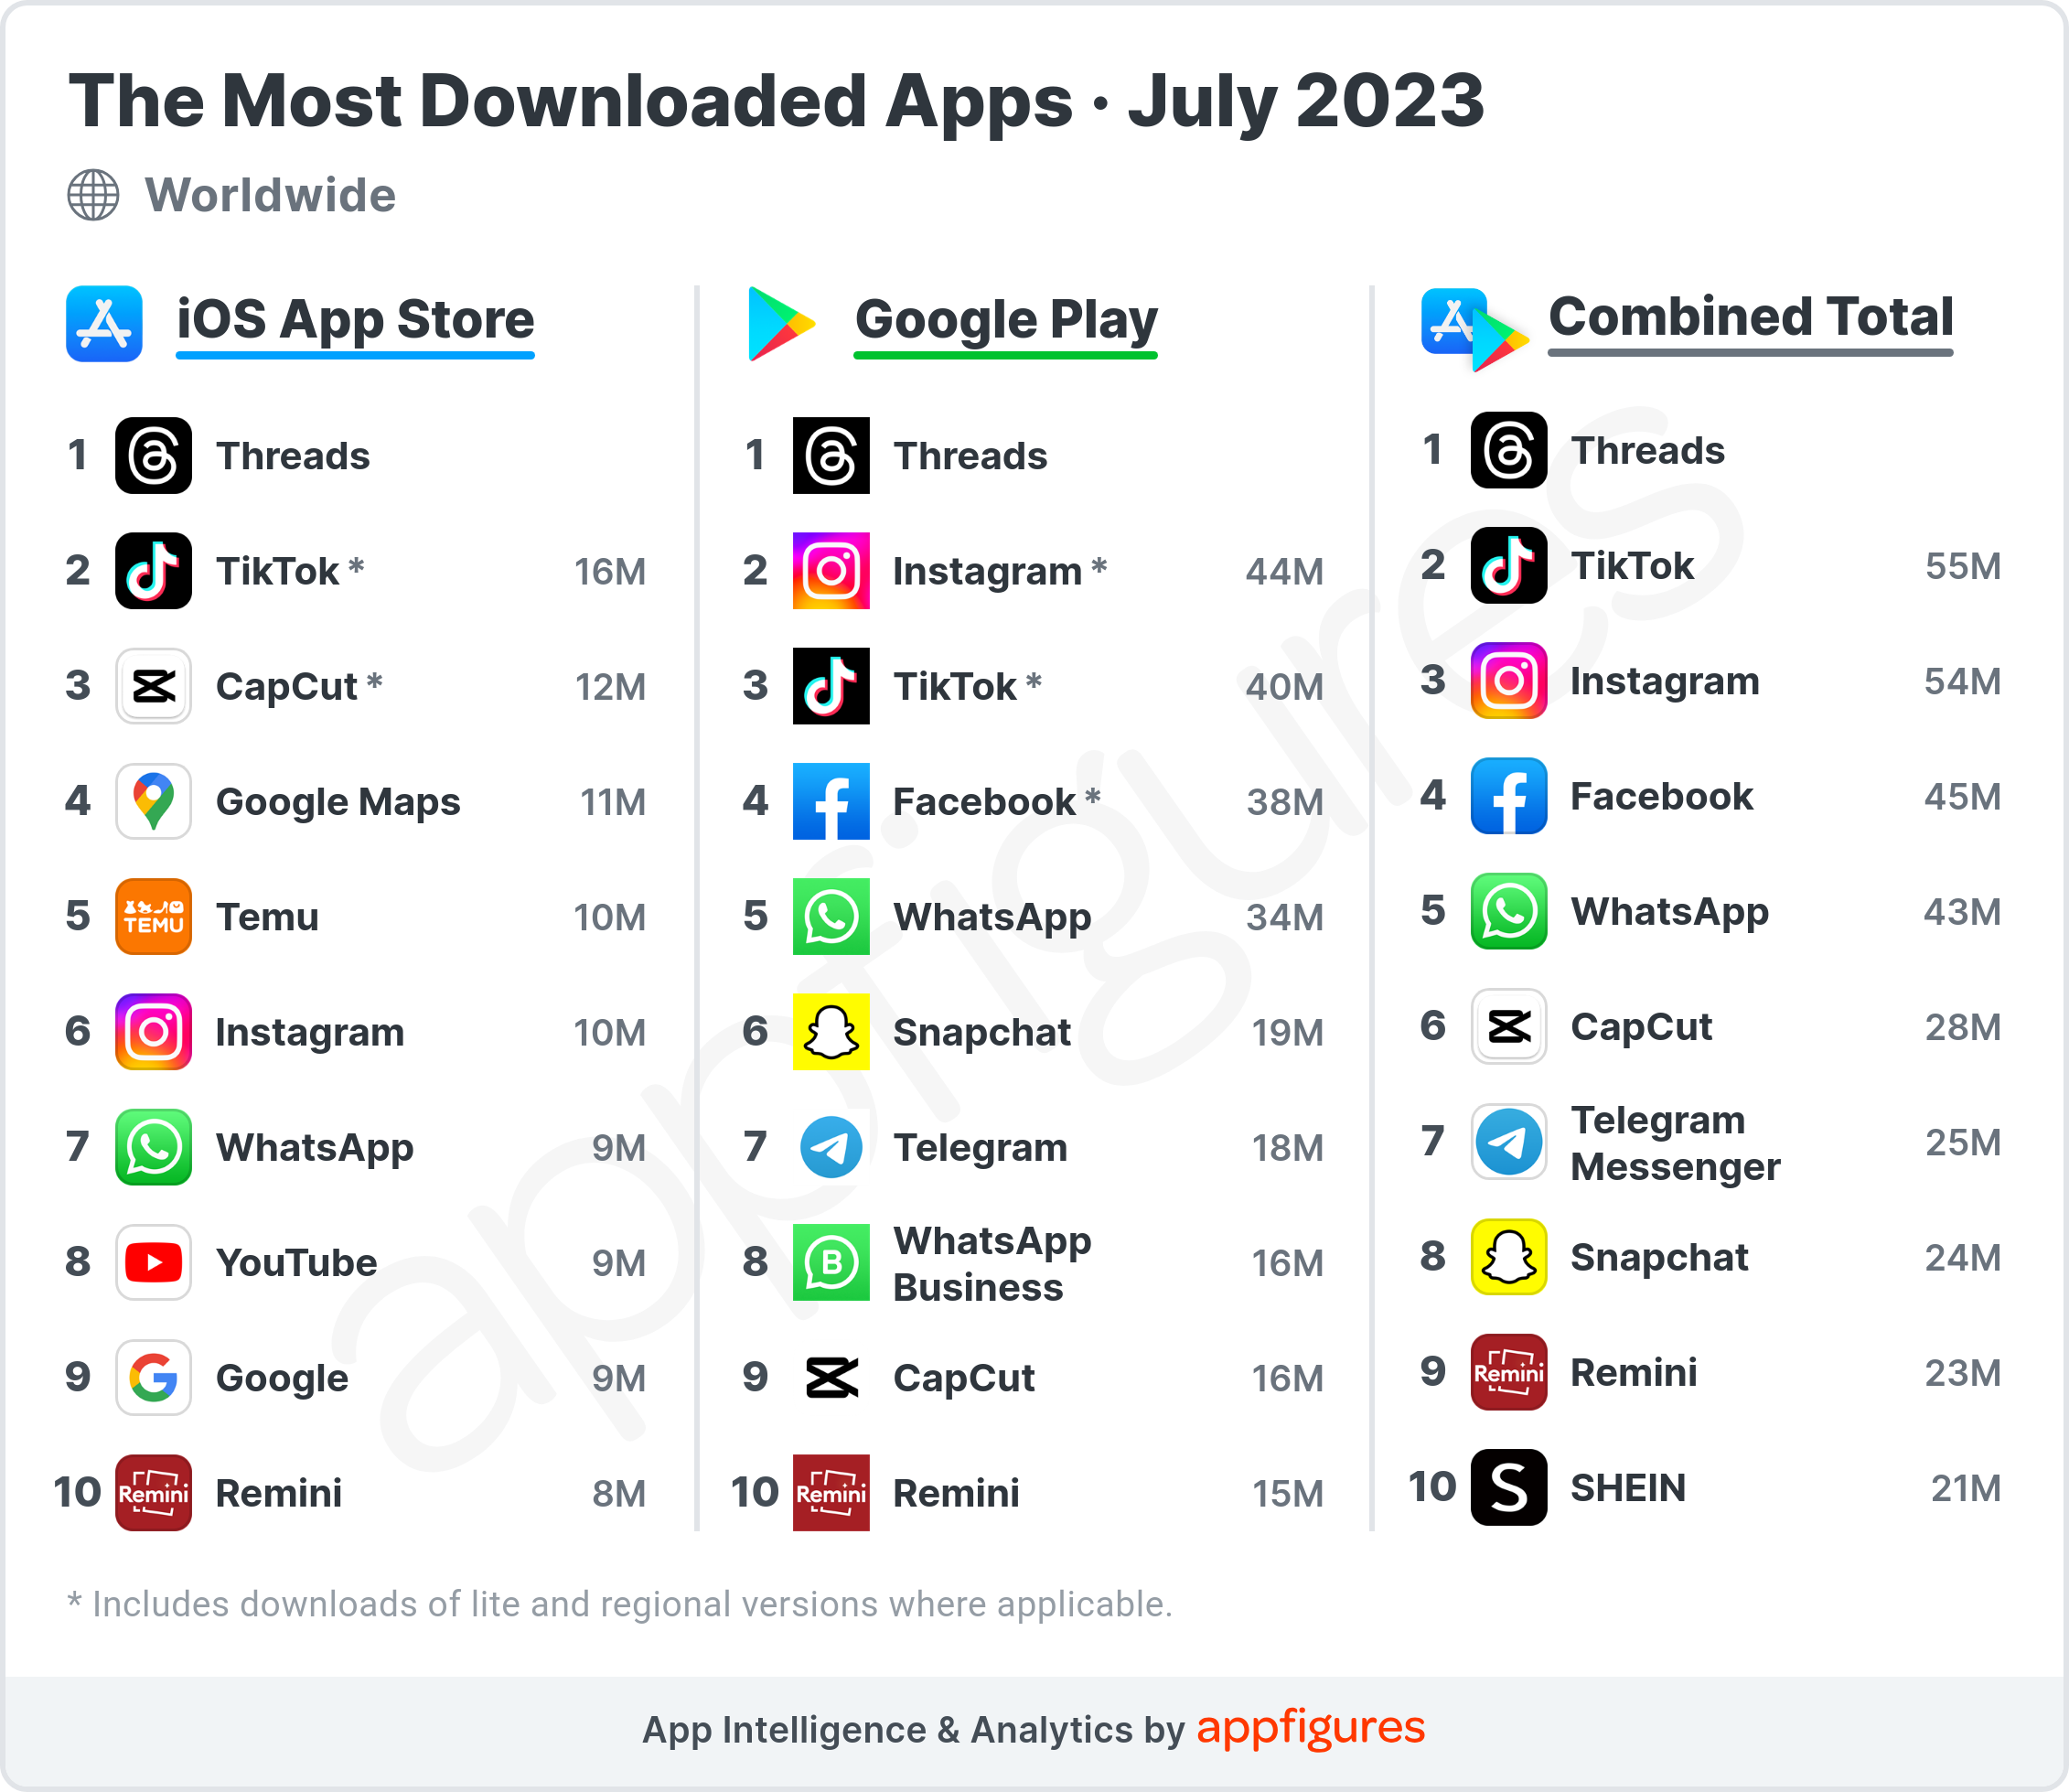 Threads Came and Went but Remini Stayed - The Most Downloaded Apps in July